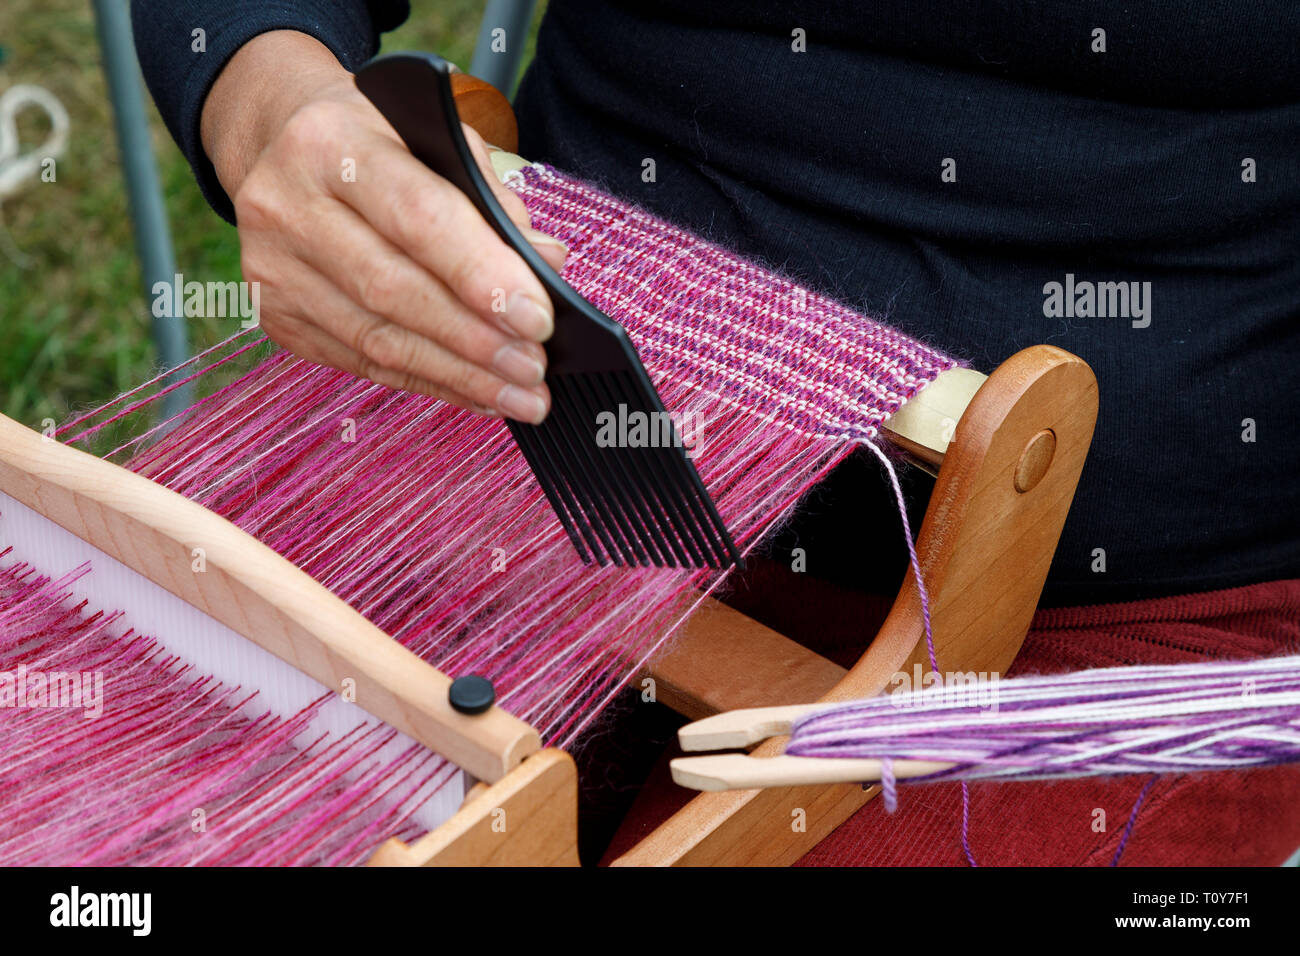 Demonstration of weaving on a handloom at the 2018 Aylsham Agricultural Show, Norfolk, UK. Stock Photo